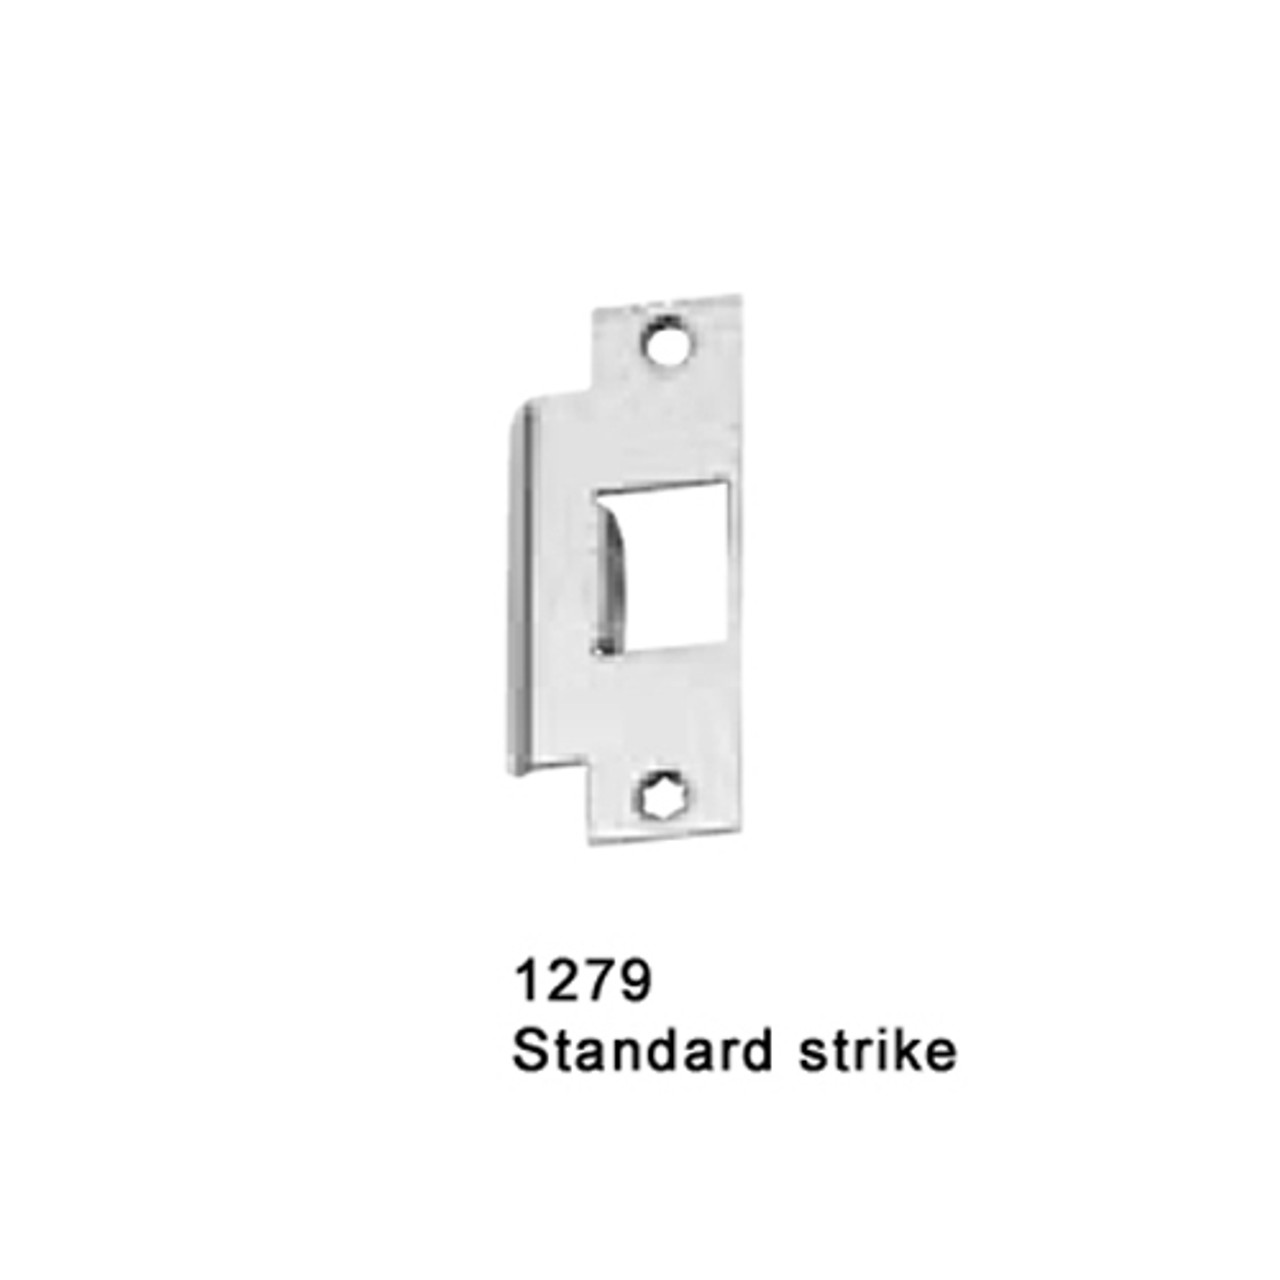 CD25-M-L-BE-DANE-US26D-3-LHR Falcon 25 Series Mortise Lock Devices 510L-BE Dane Lever Trim with Blank Escutcheon in Satin Chrome